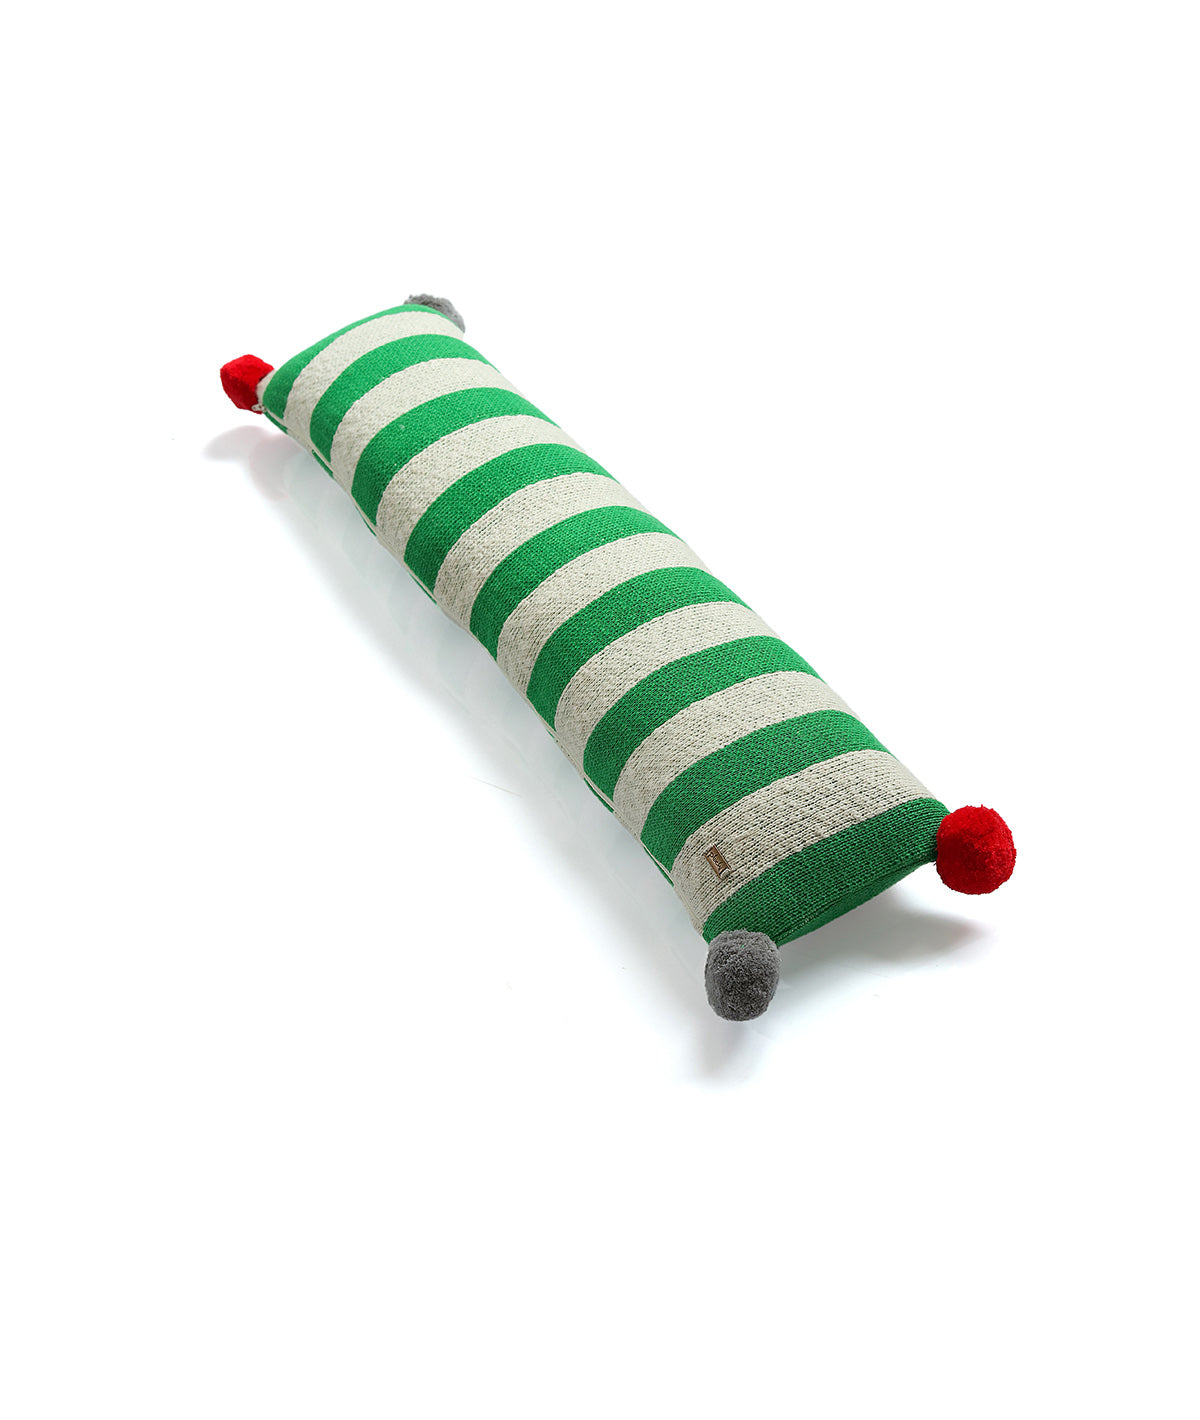 Streaky Cotton Knitted Decorative Hot Green & Natural Color with Red Pom Poms 35 x 7 Inches Oblong Pillow Cover